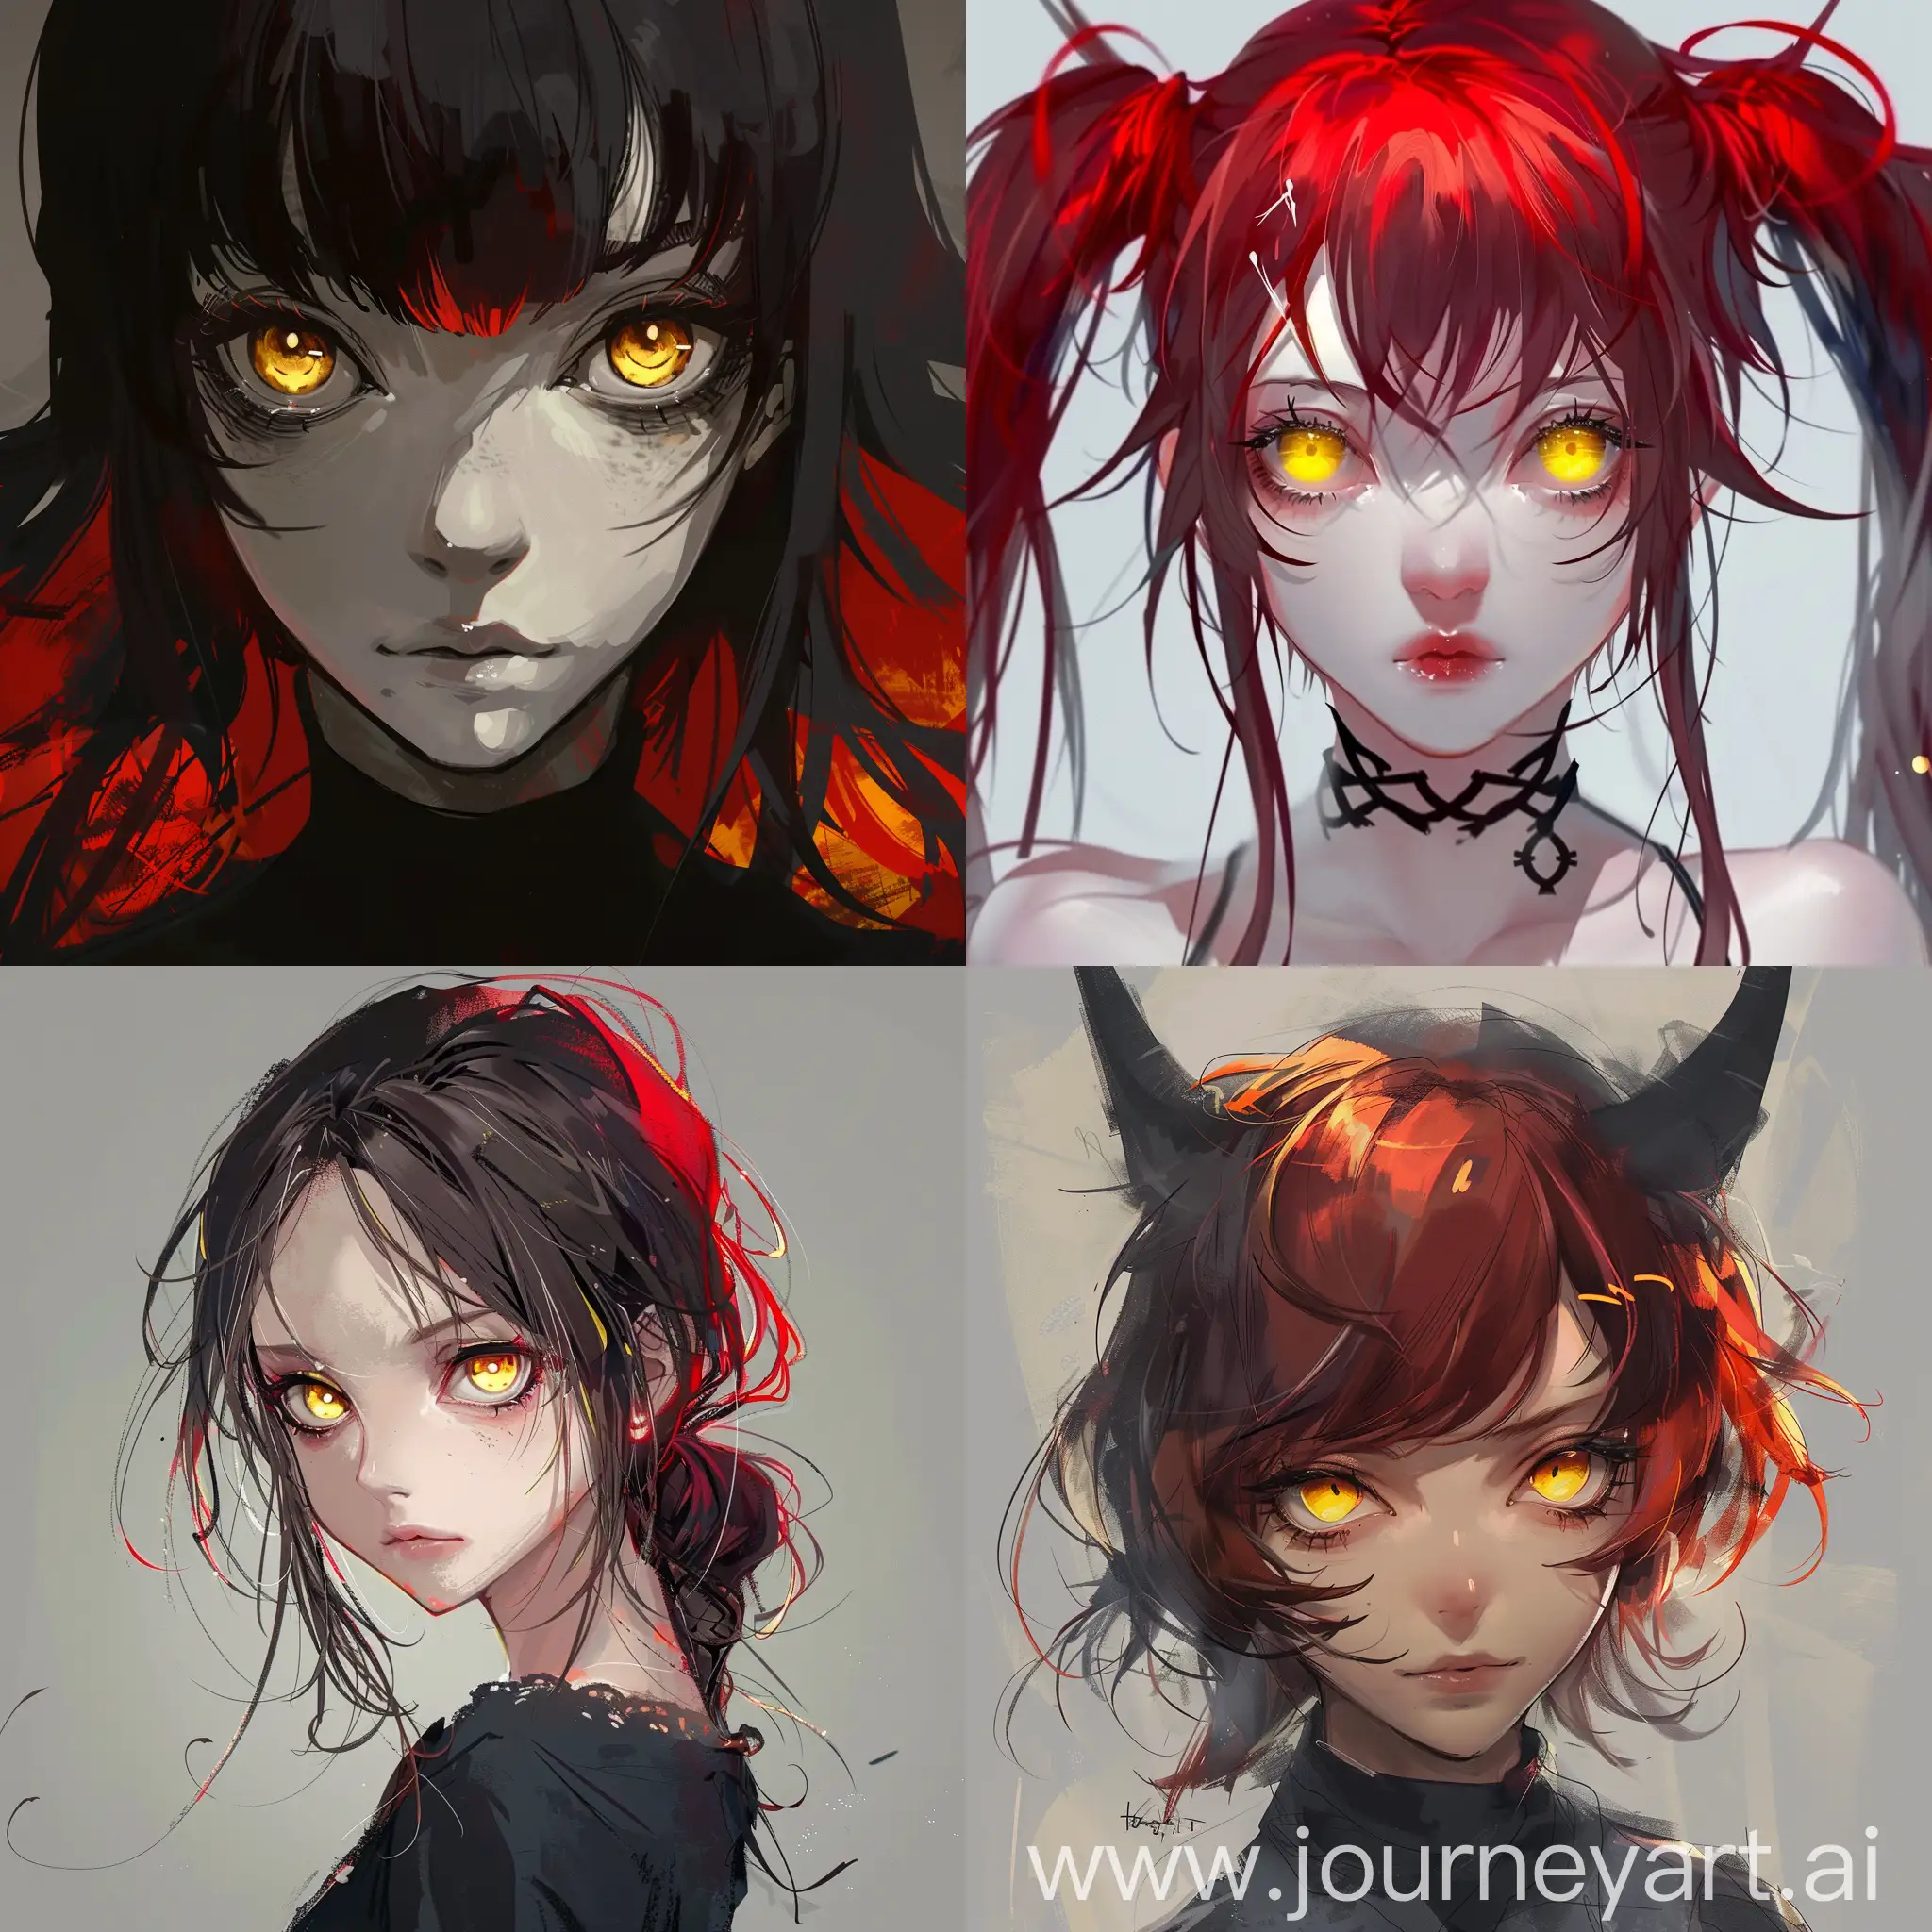 Anime-Character-Concept-Art-Enigmatic-Girl-with-Red-Hair-and-Yellow-Eyes